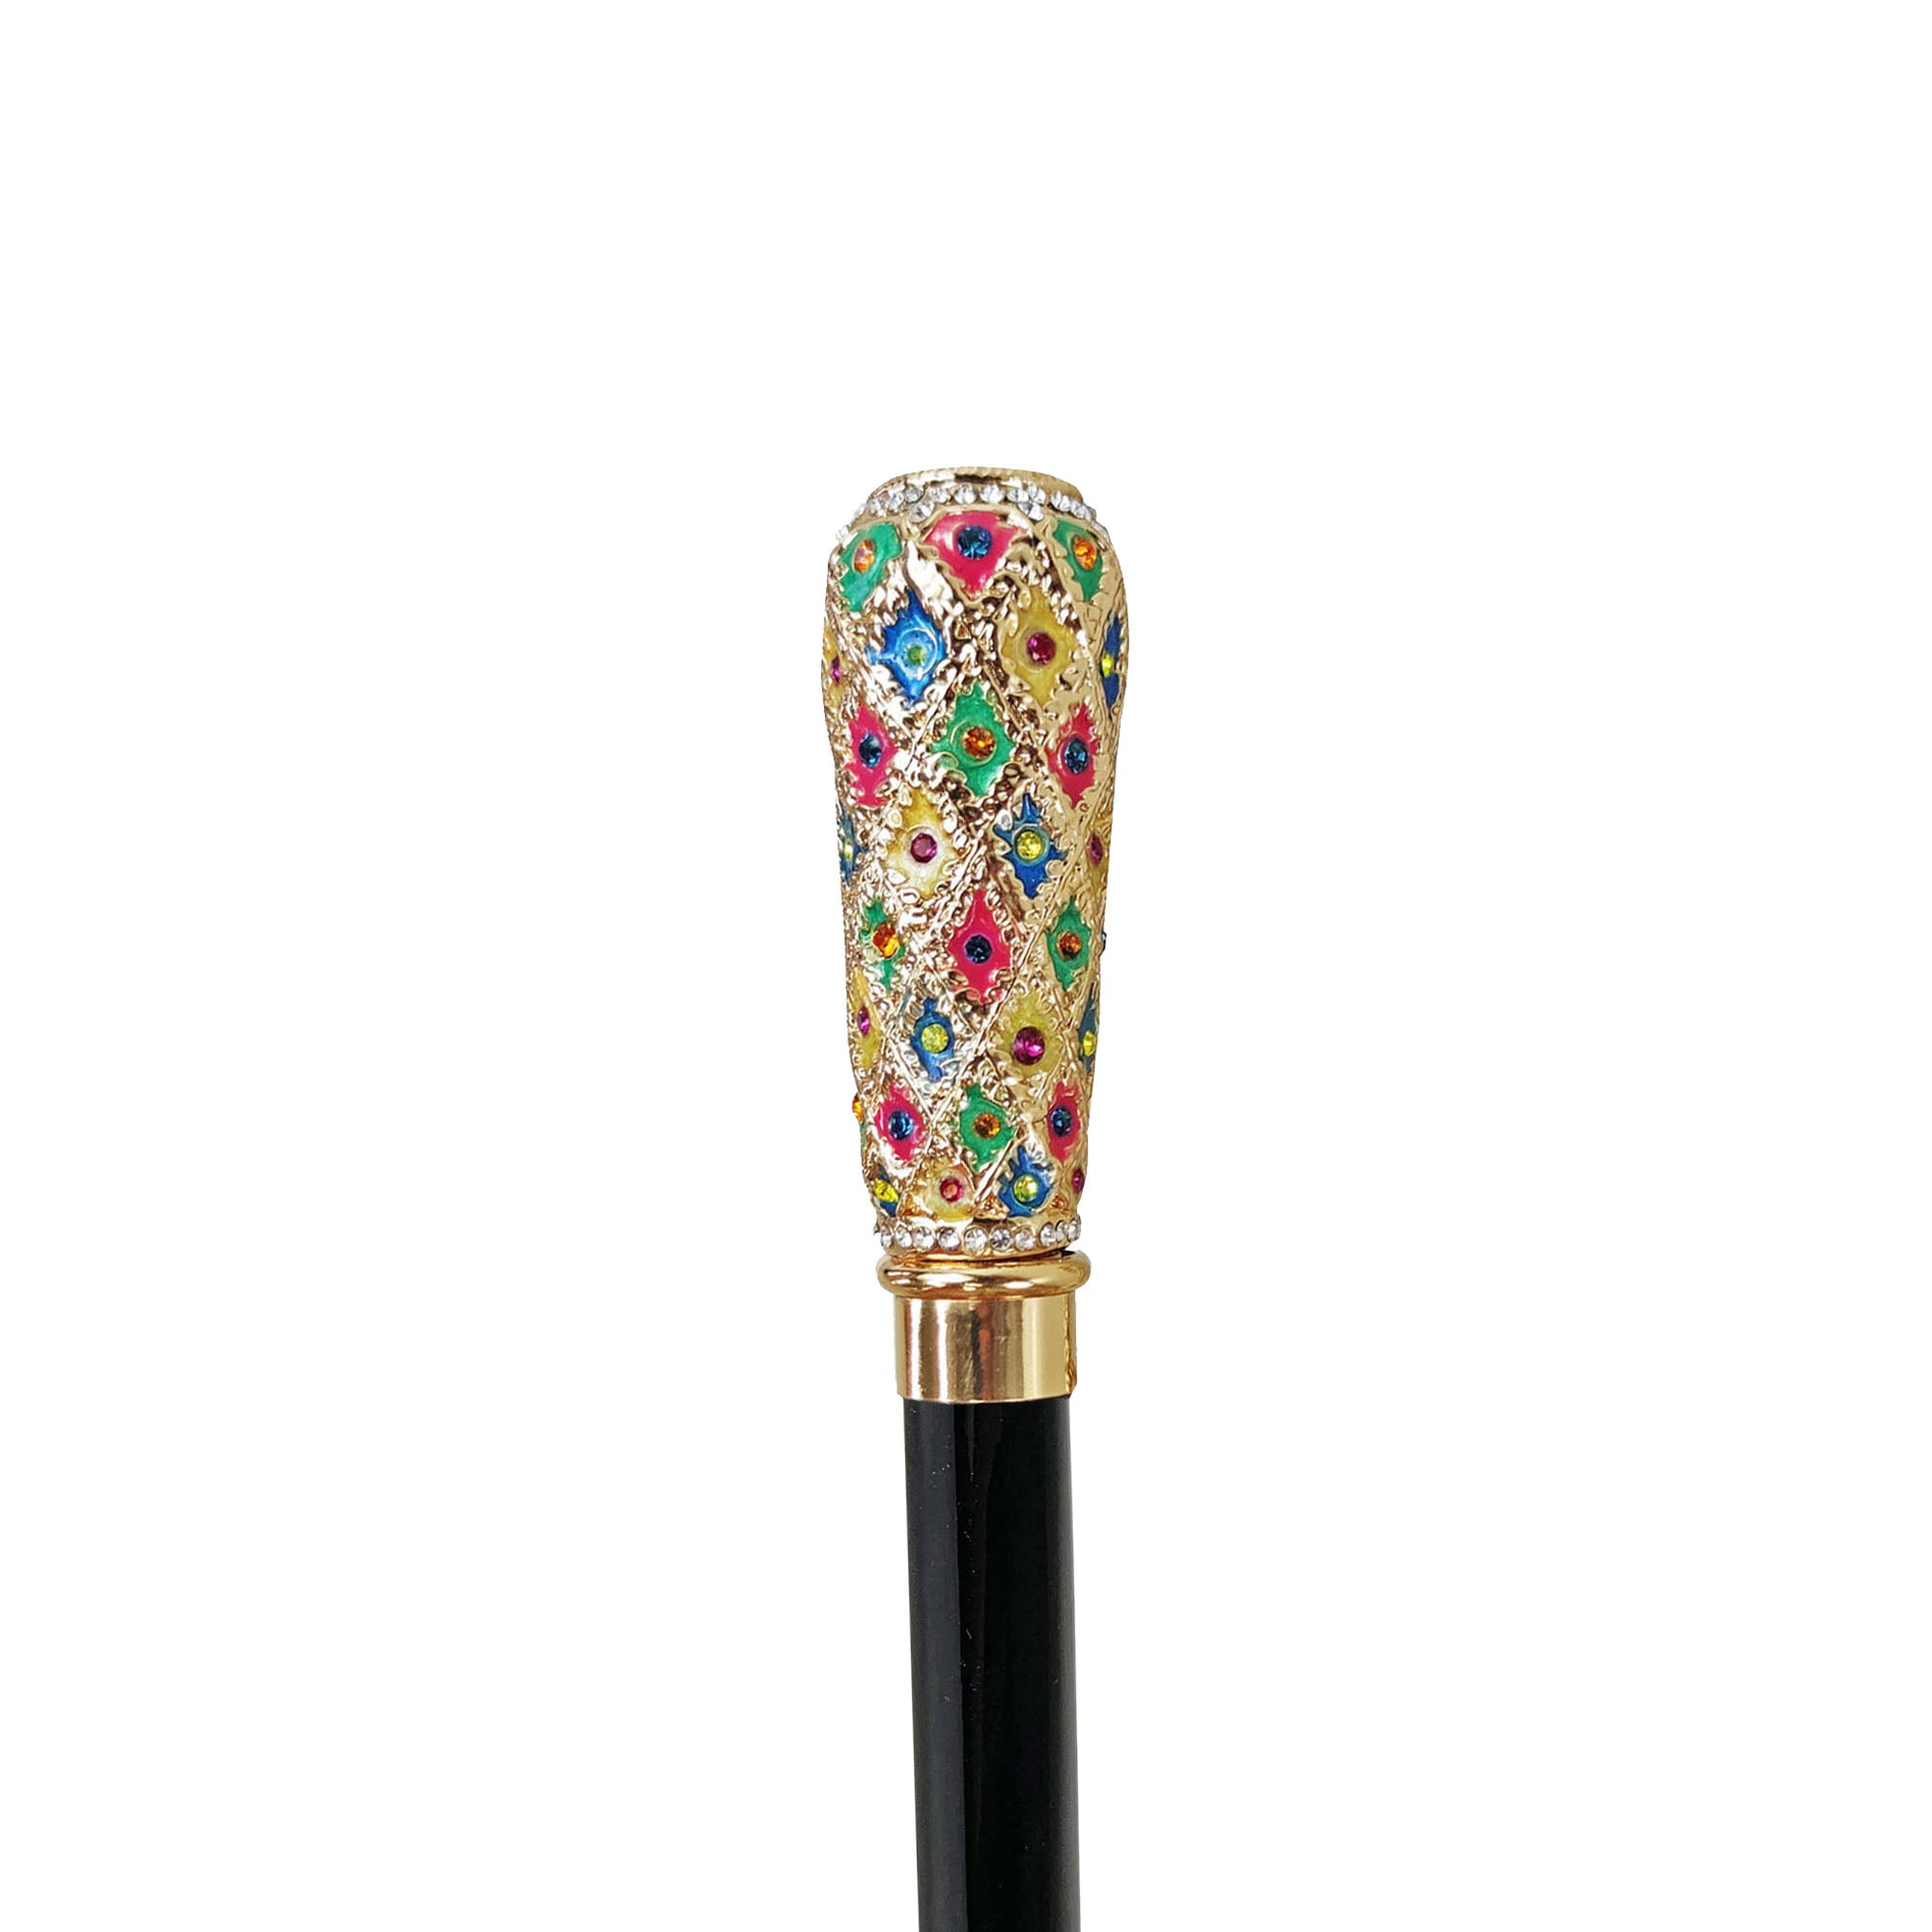 Milord Walking stick  - Hand painted Knob with multicolor crystals